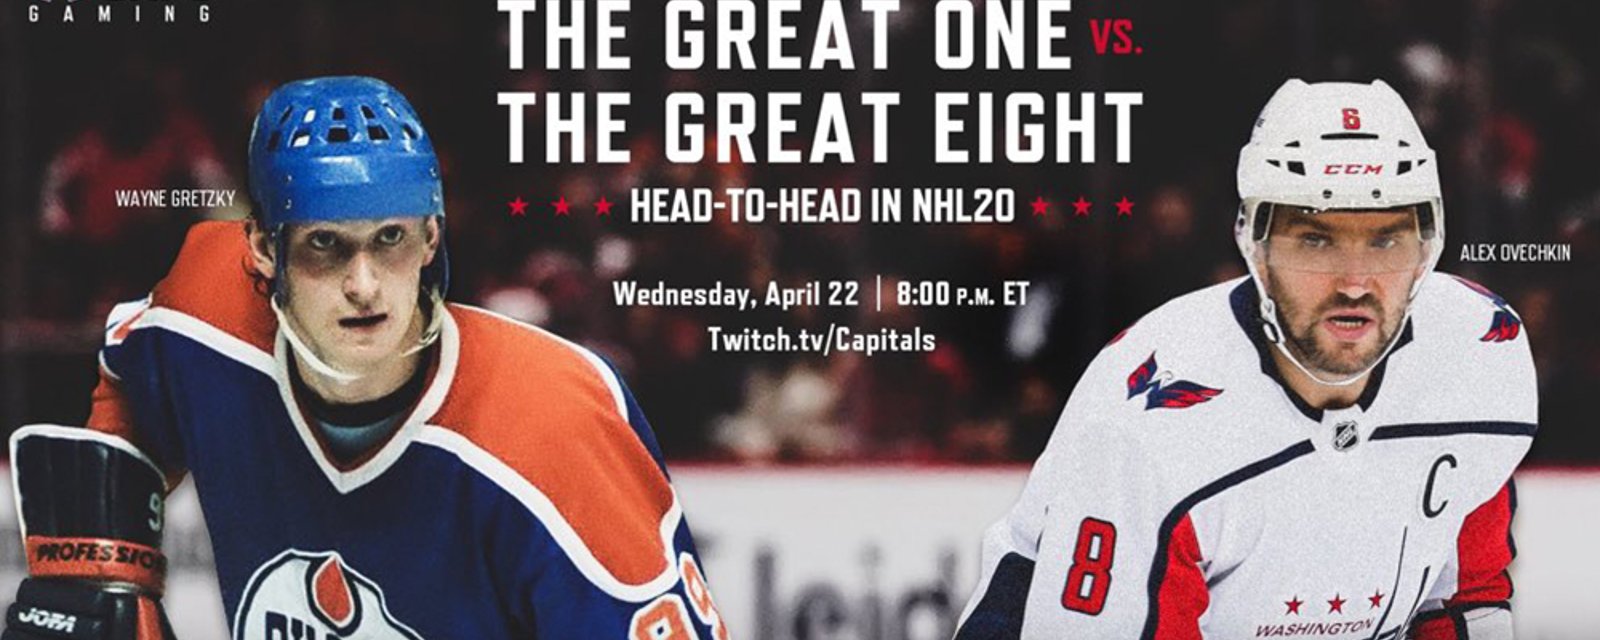 Ovechkin and Gretzky go head to head tonight on Twitch!